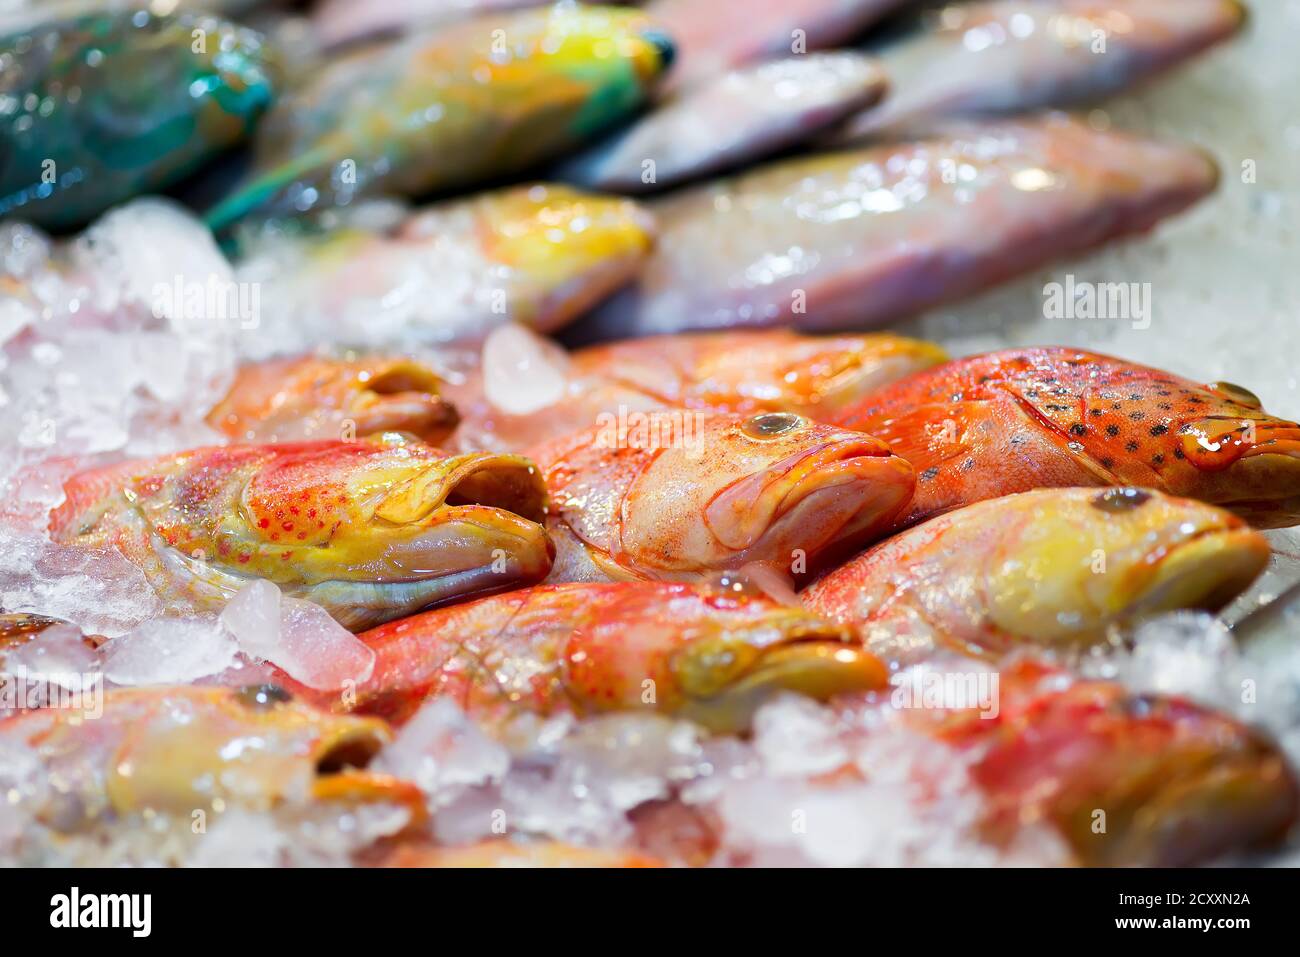 Close-up seafood backdrop from assortment of freshly caught colorful natural raw uncooked sea fish on an iced market counter. Sea delicacy food. Stock Photo